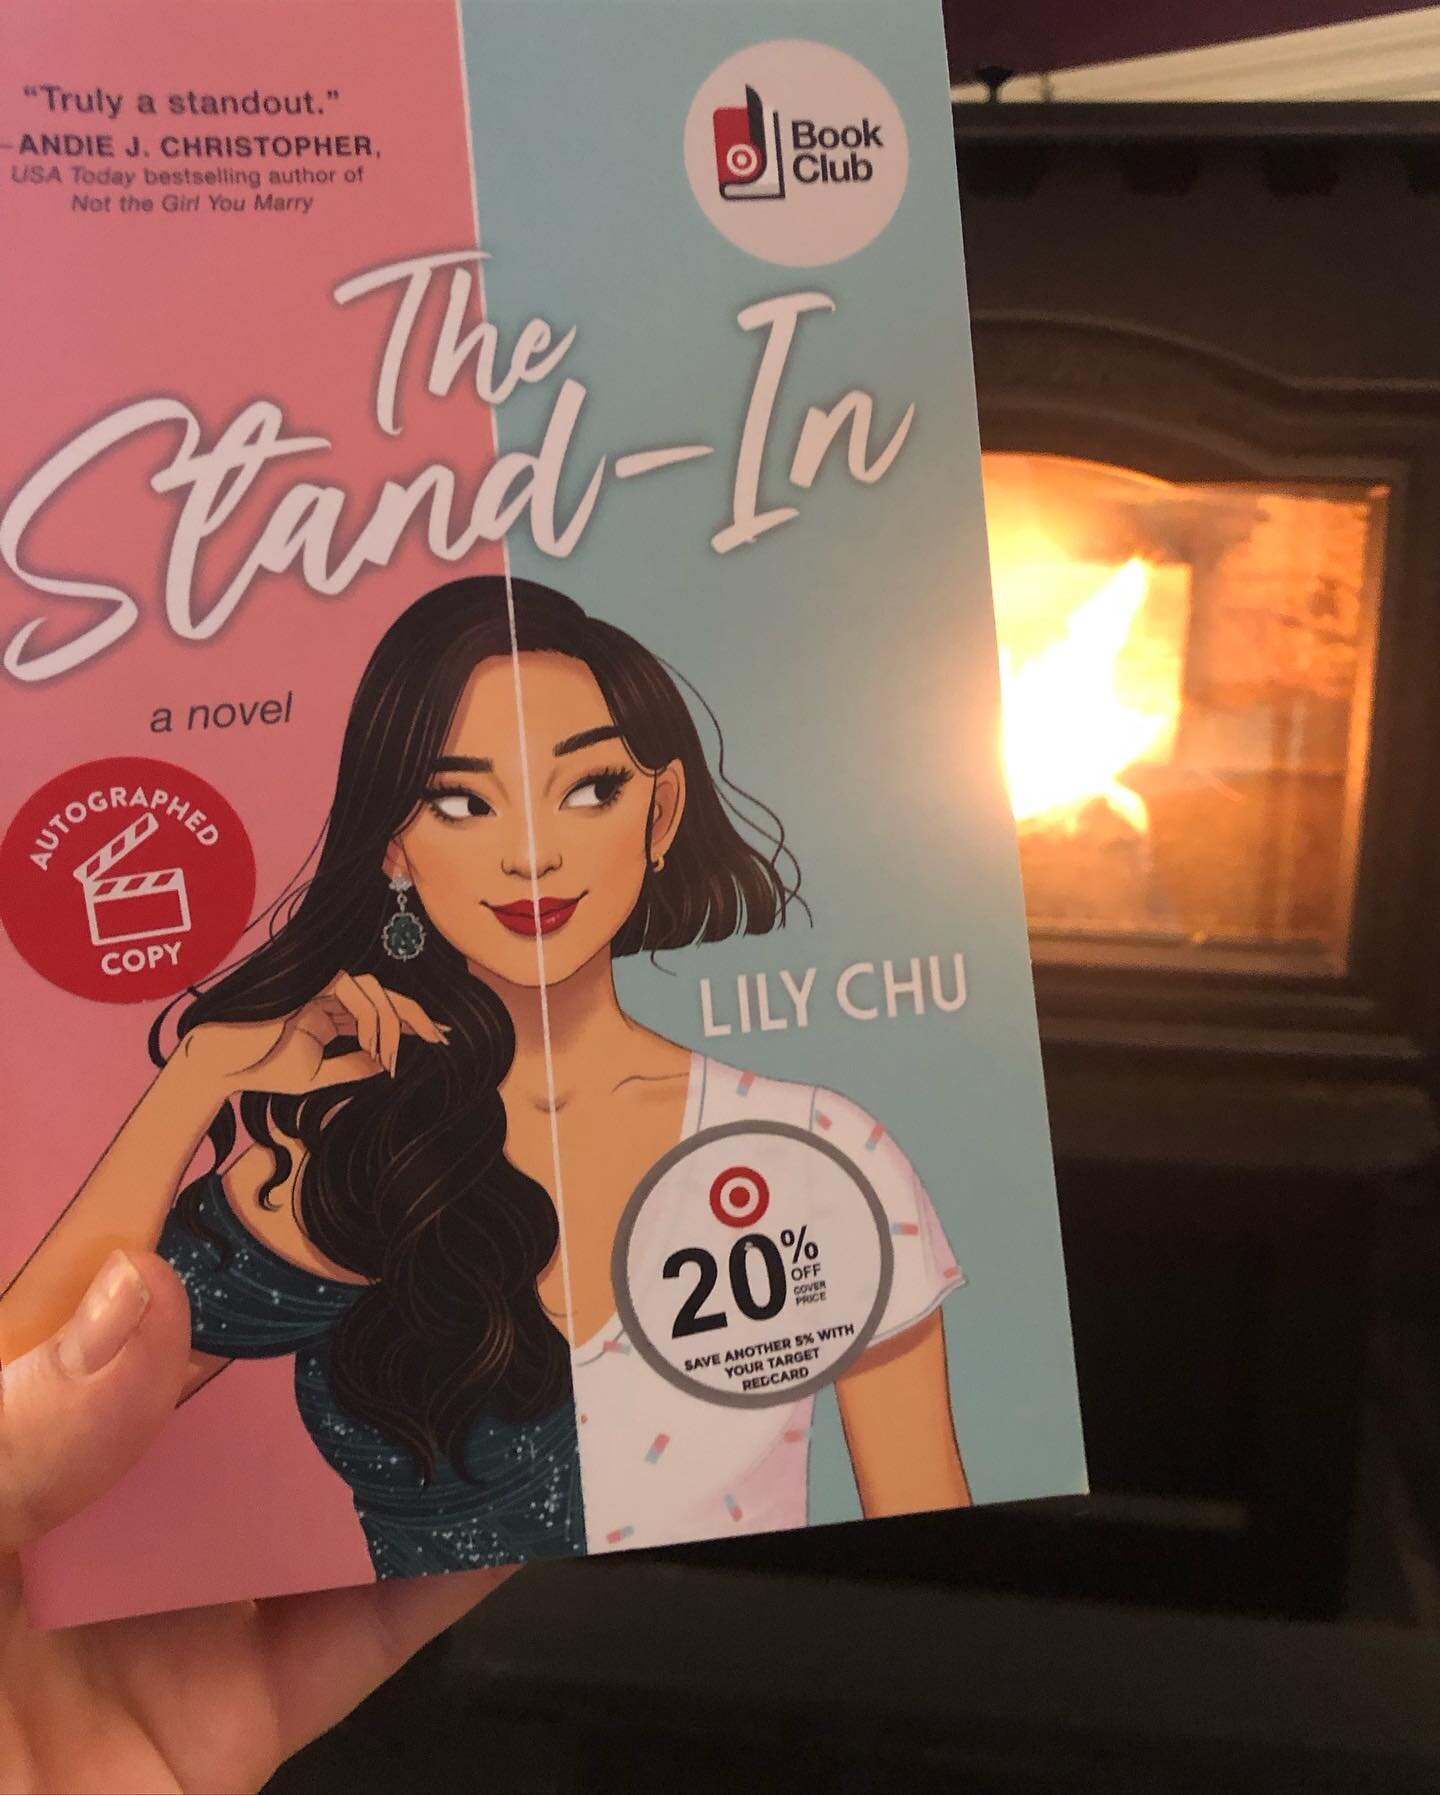 I went to Target for rainboots and left with a signed copy of THE STAND-IN by Lily Chu! I can&rsquo;t wait to read this, and wouldn&rsquo;t you know, it&rsquo;s a rainy day&mdash;perfect for snuggling up with a book. ☕️📖

#amreading #bookstagram #bo